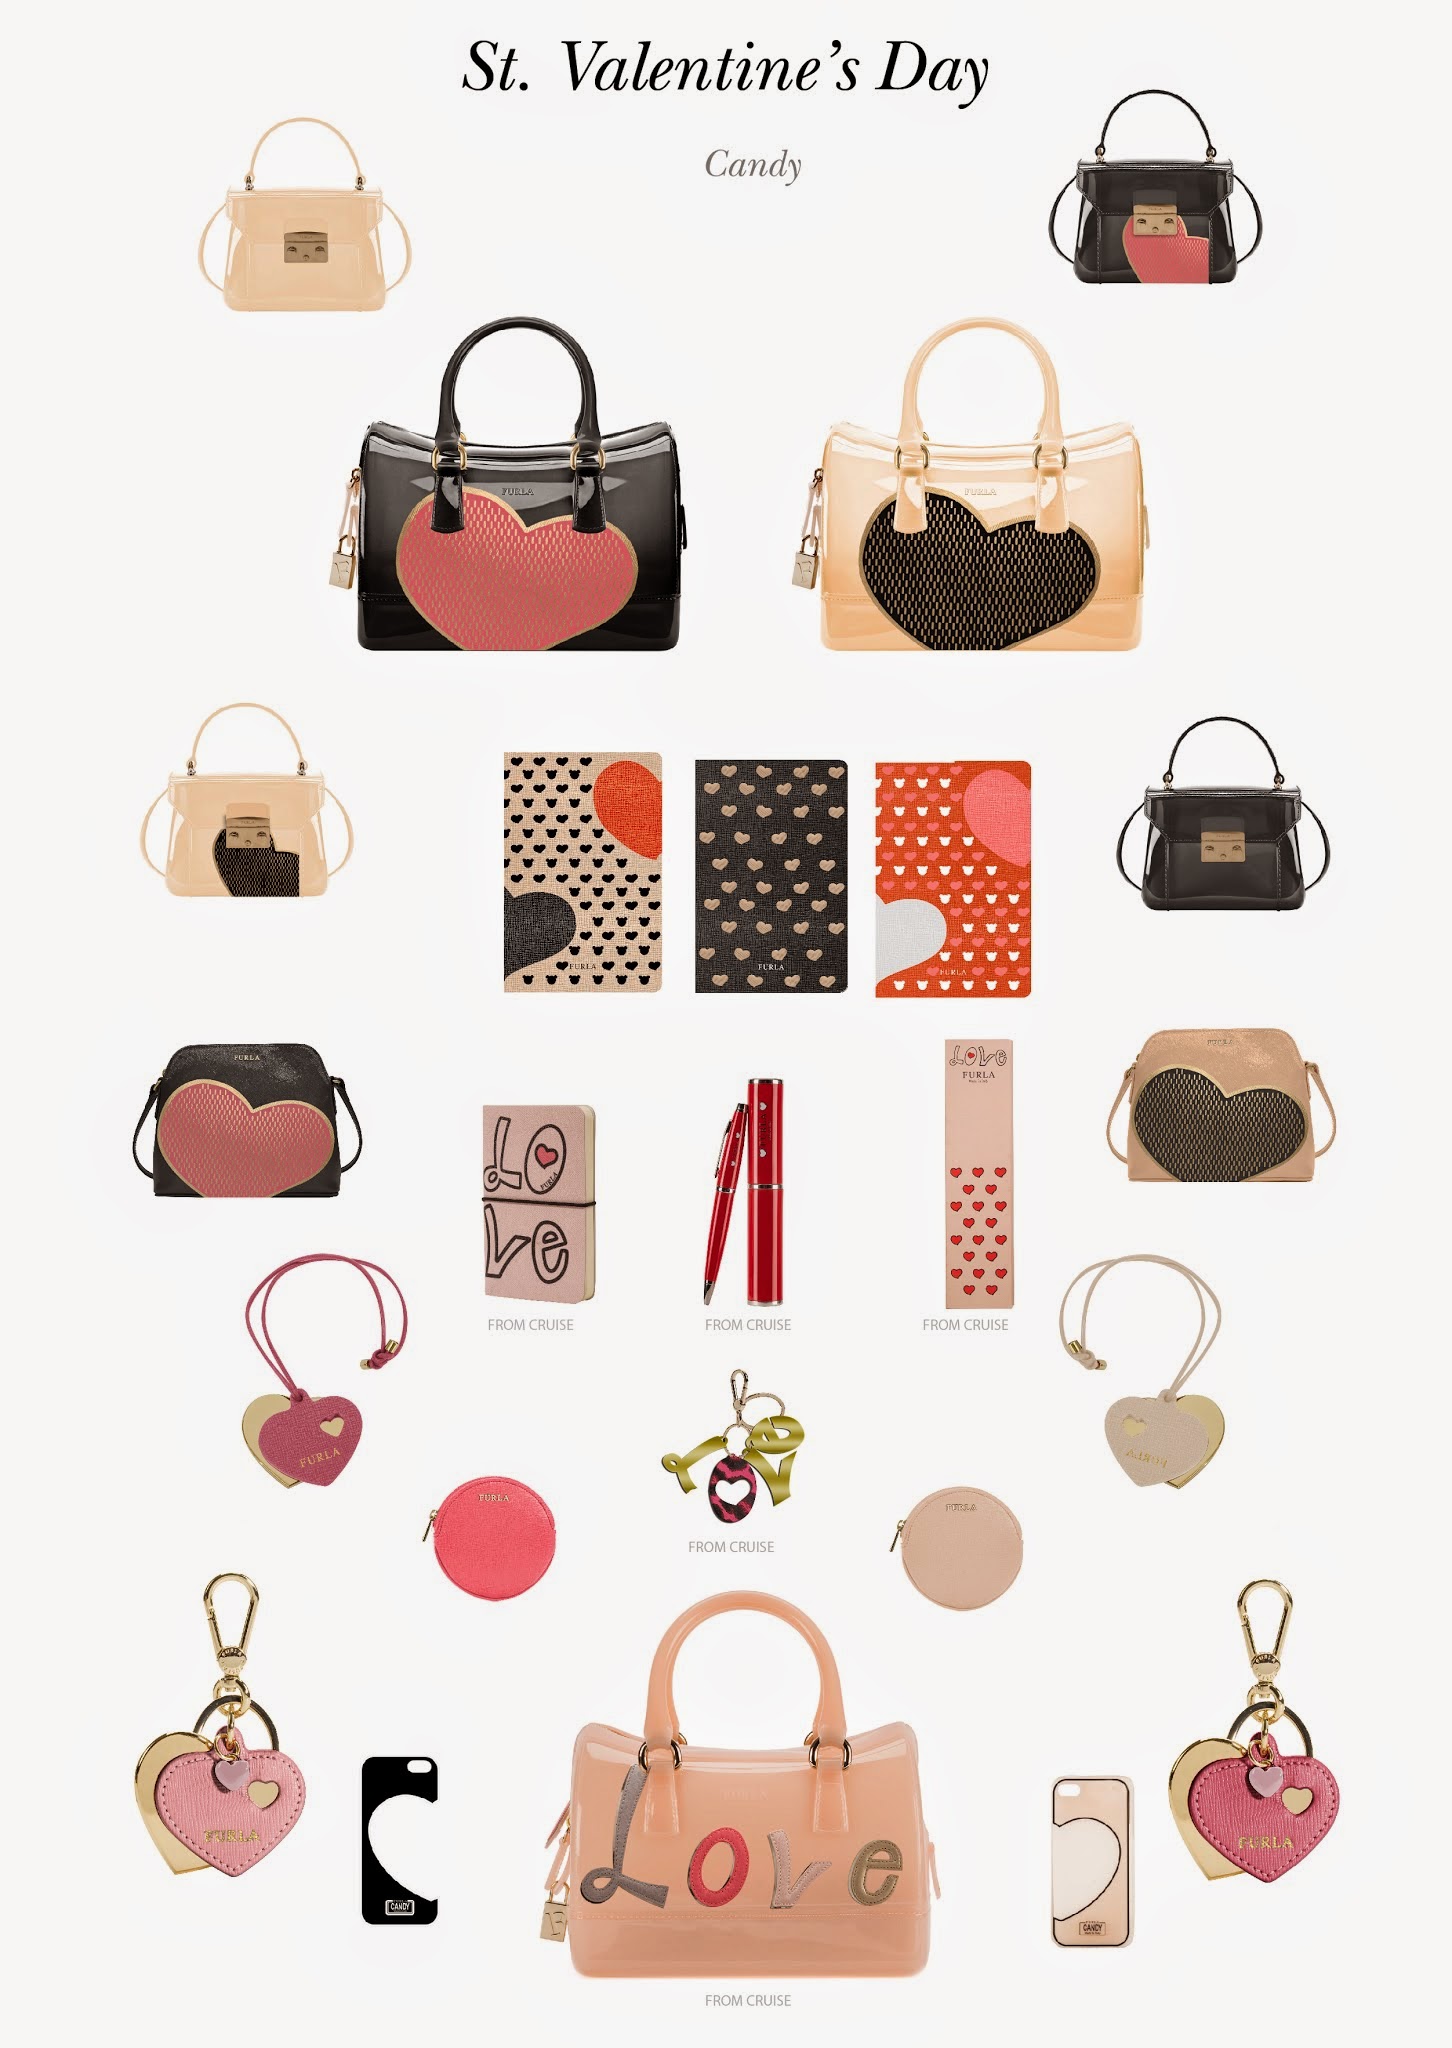 Furla's Valentine's Day Collection